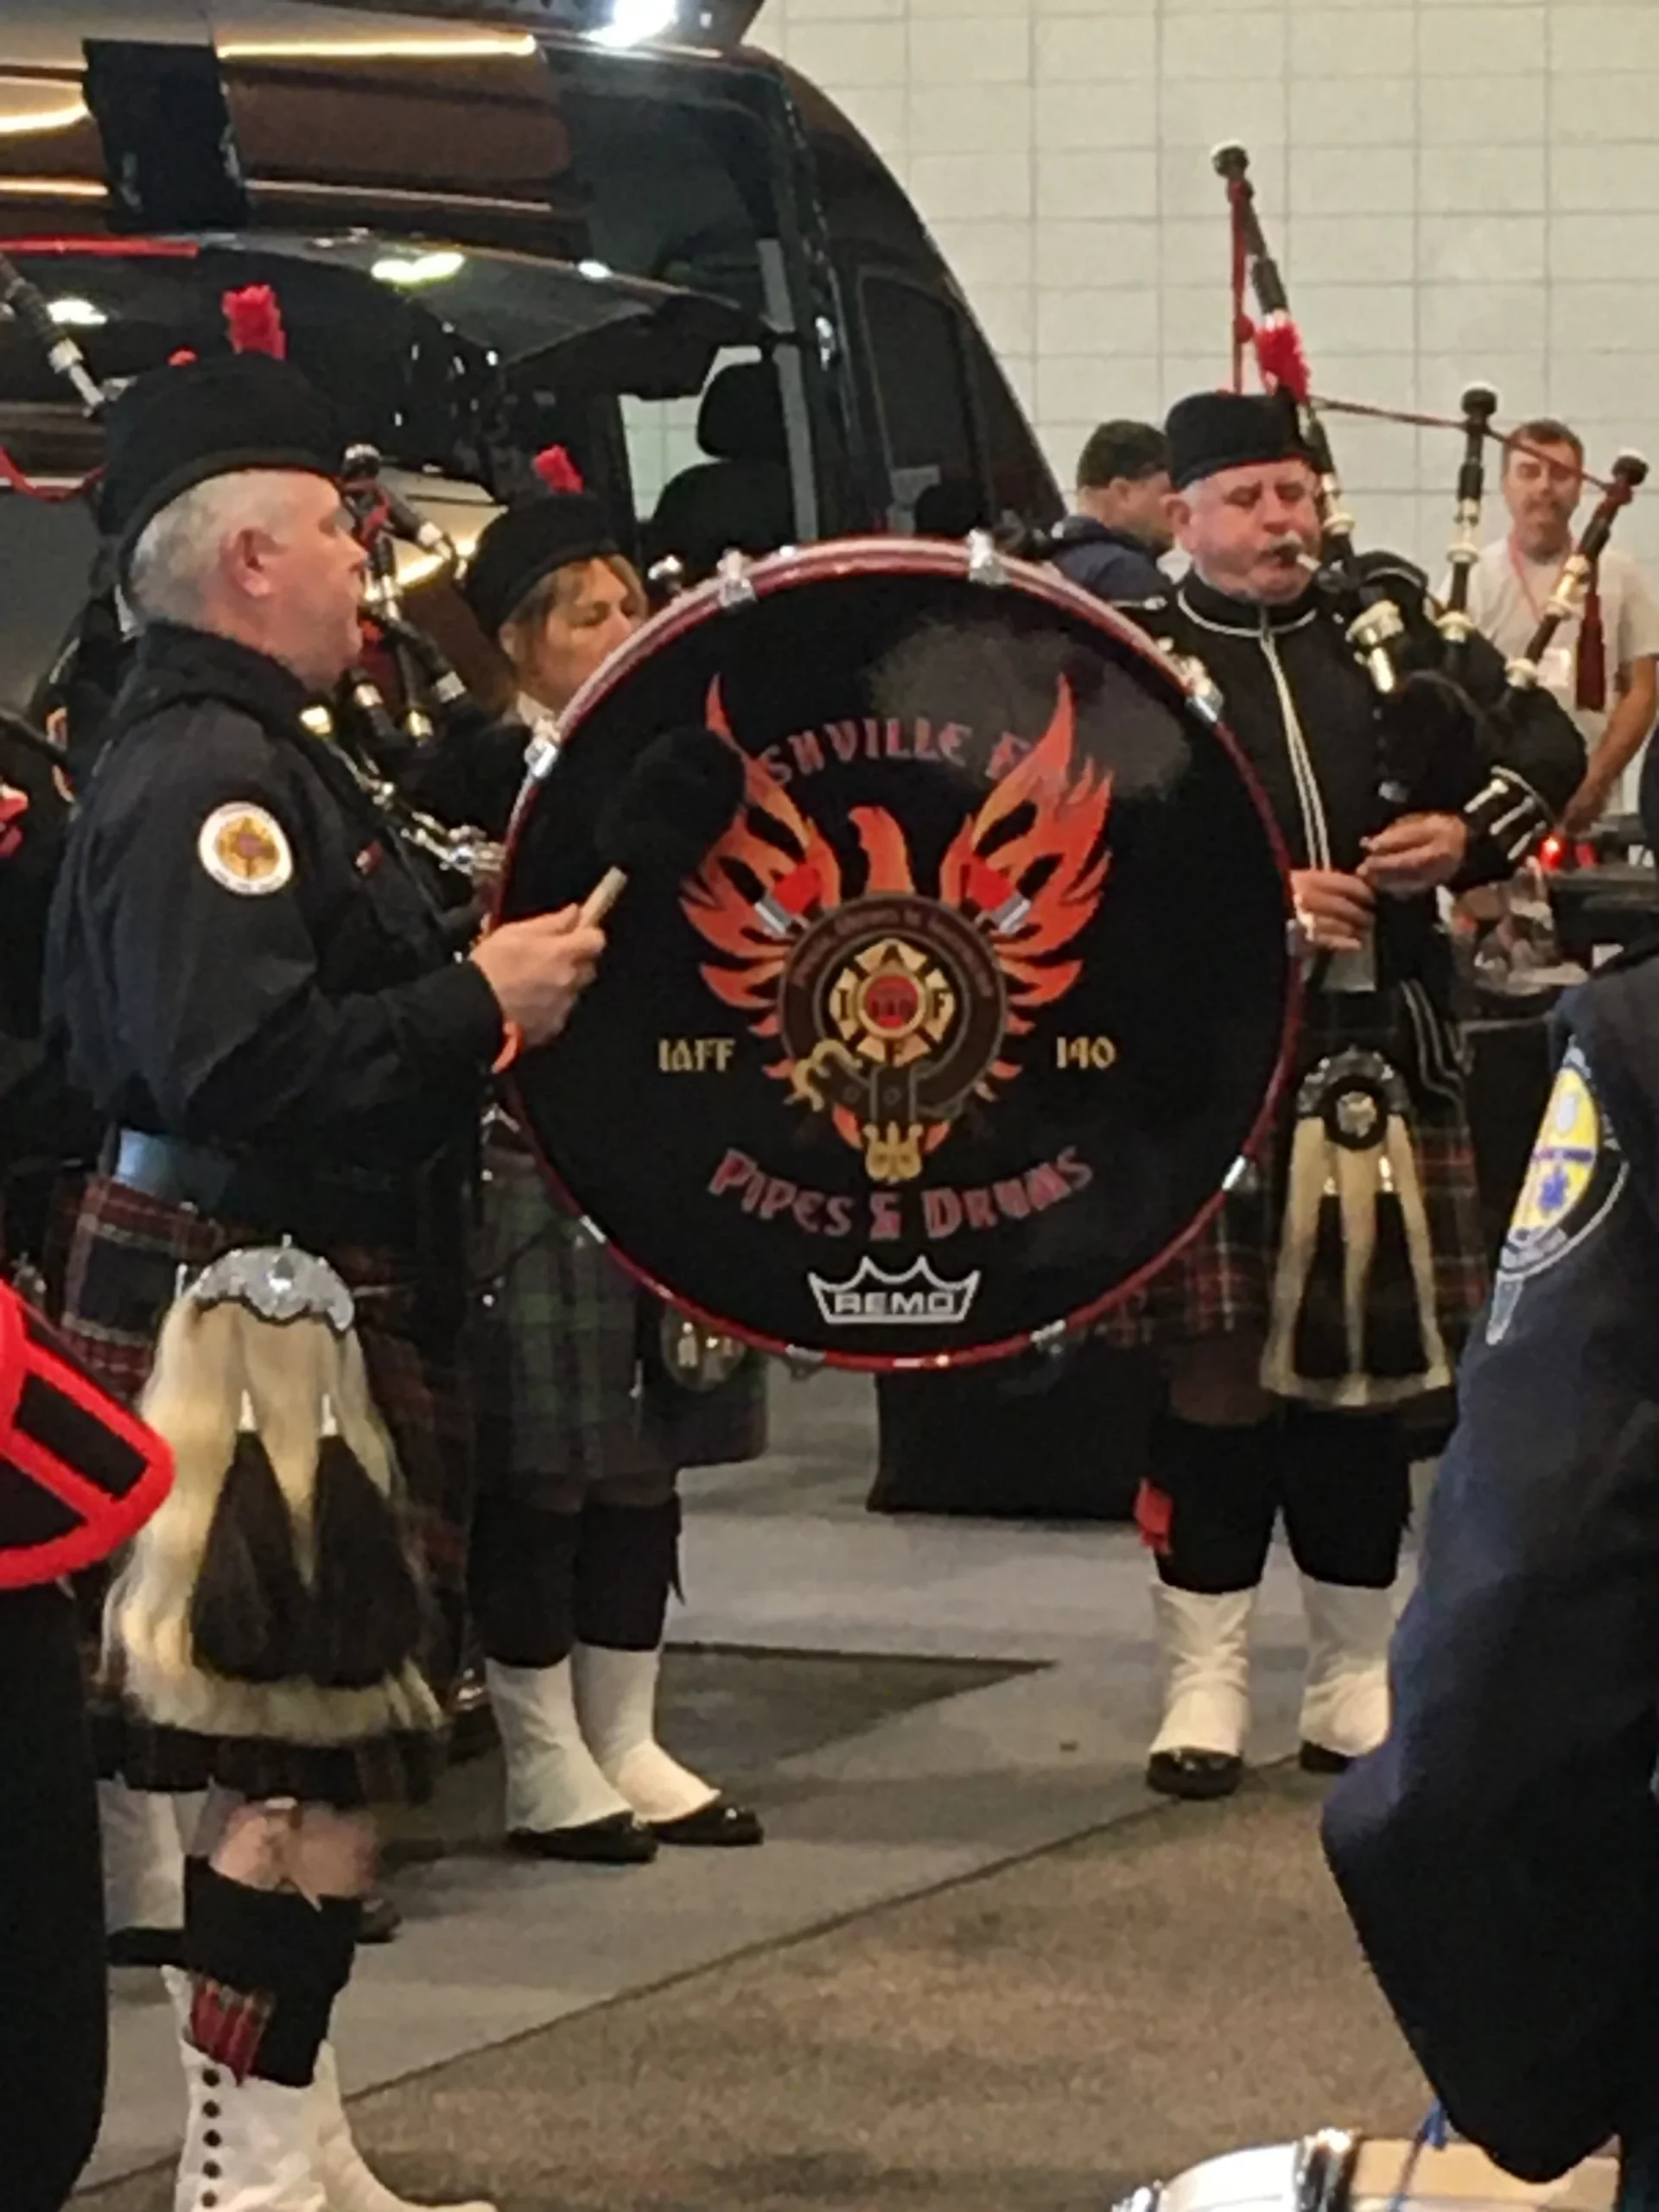 Bagpipers play beside a base drum labeled with a firefighter pipe and drum unit's logo at the 2019 Firehouse Expo.